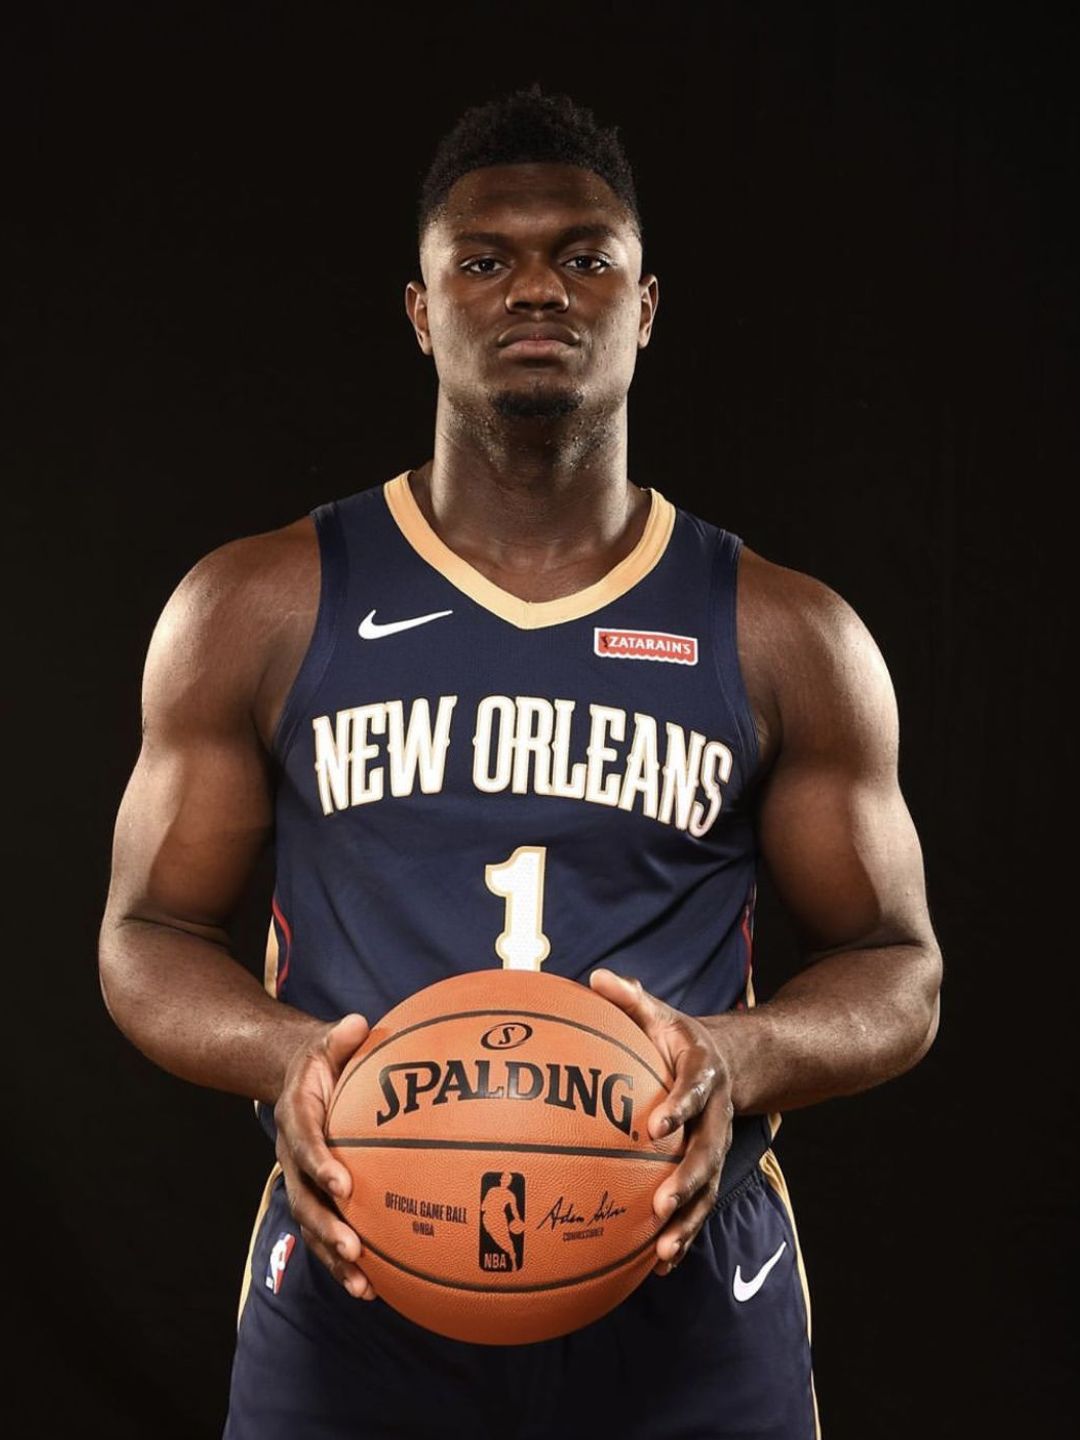 Zion Williamson early life